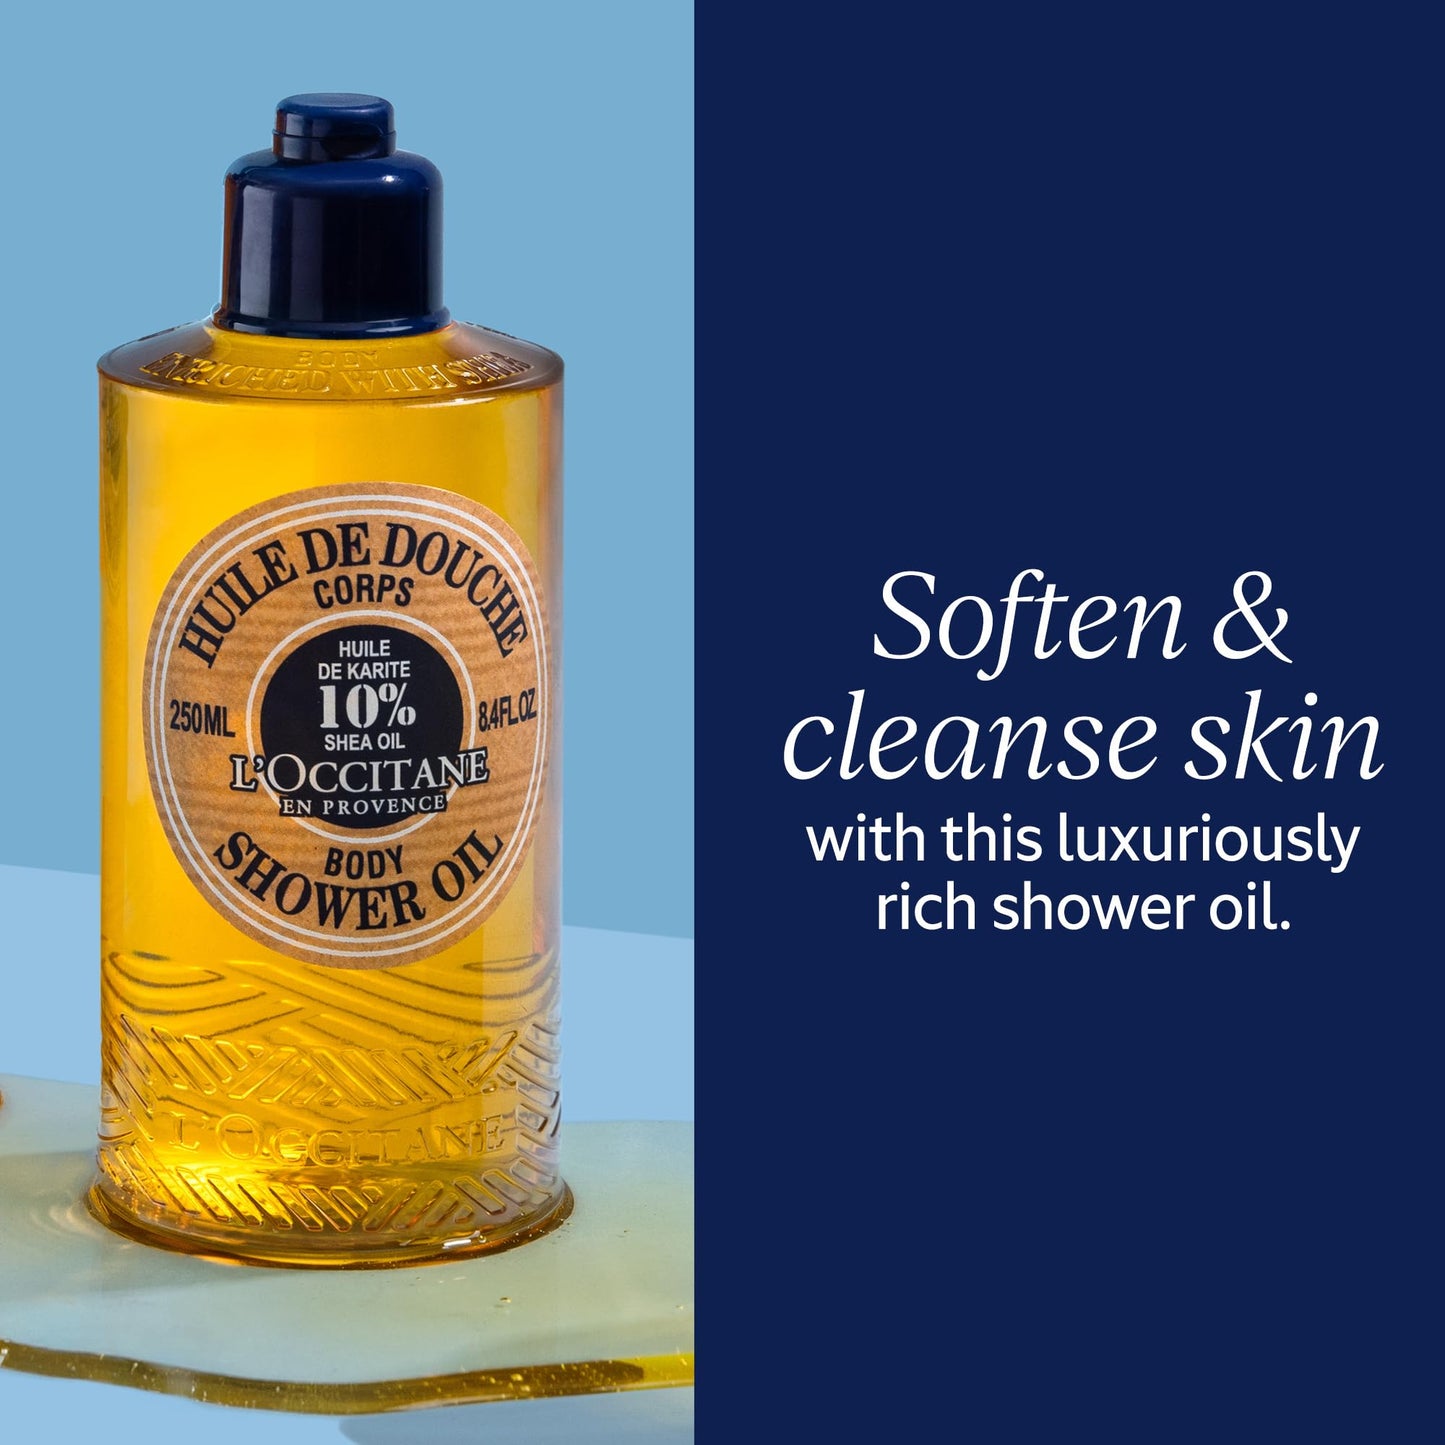 L'OCCITANE Shea Body Shower Oil: Soften & Cleanse skin, With 10% Shea Oil, Nourish, Soothe Feelings of Tightness, Shea Scent, Refill Available